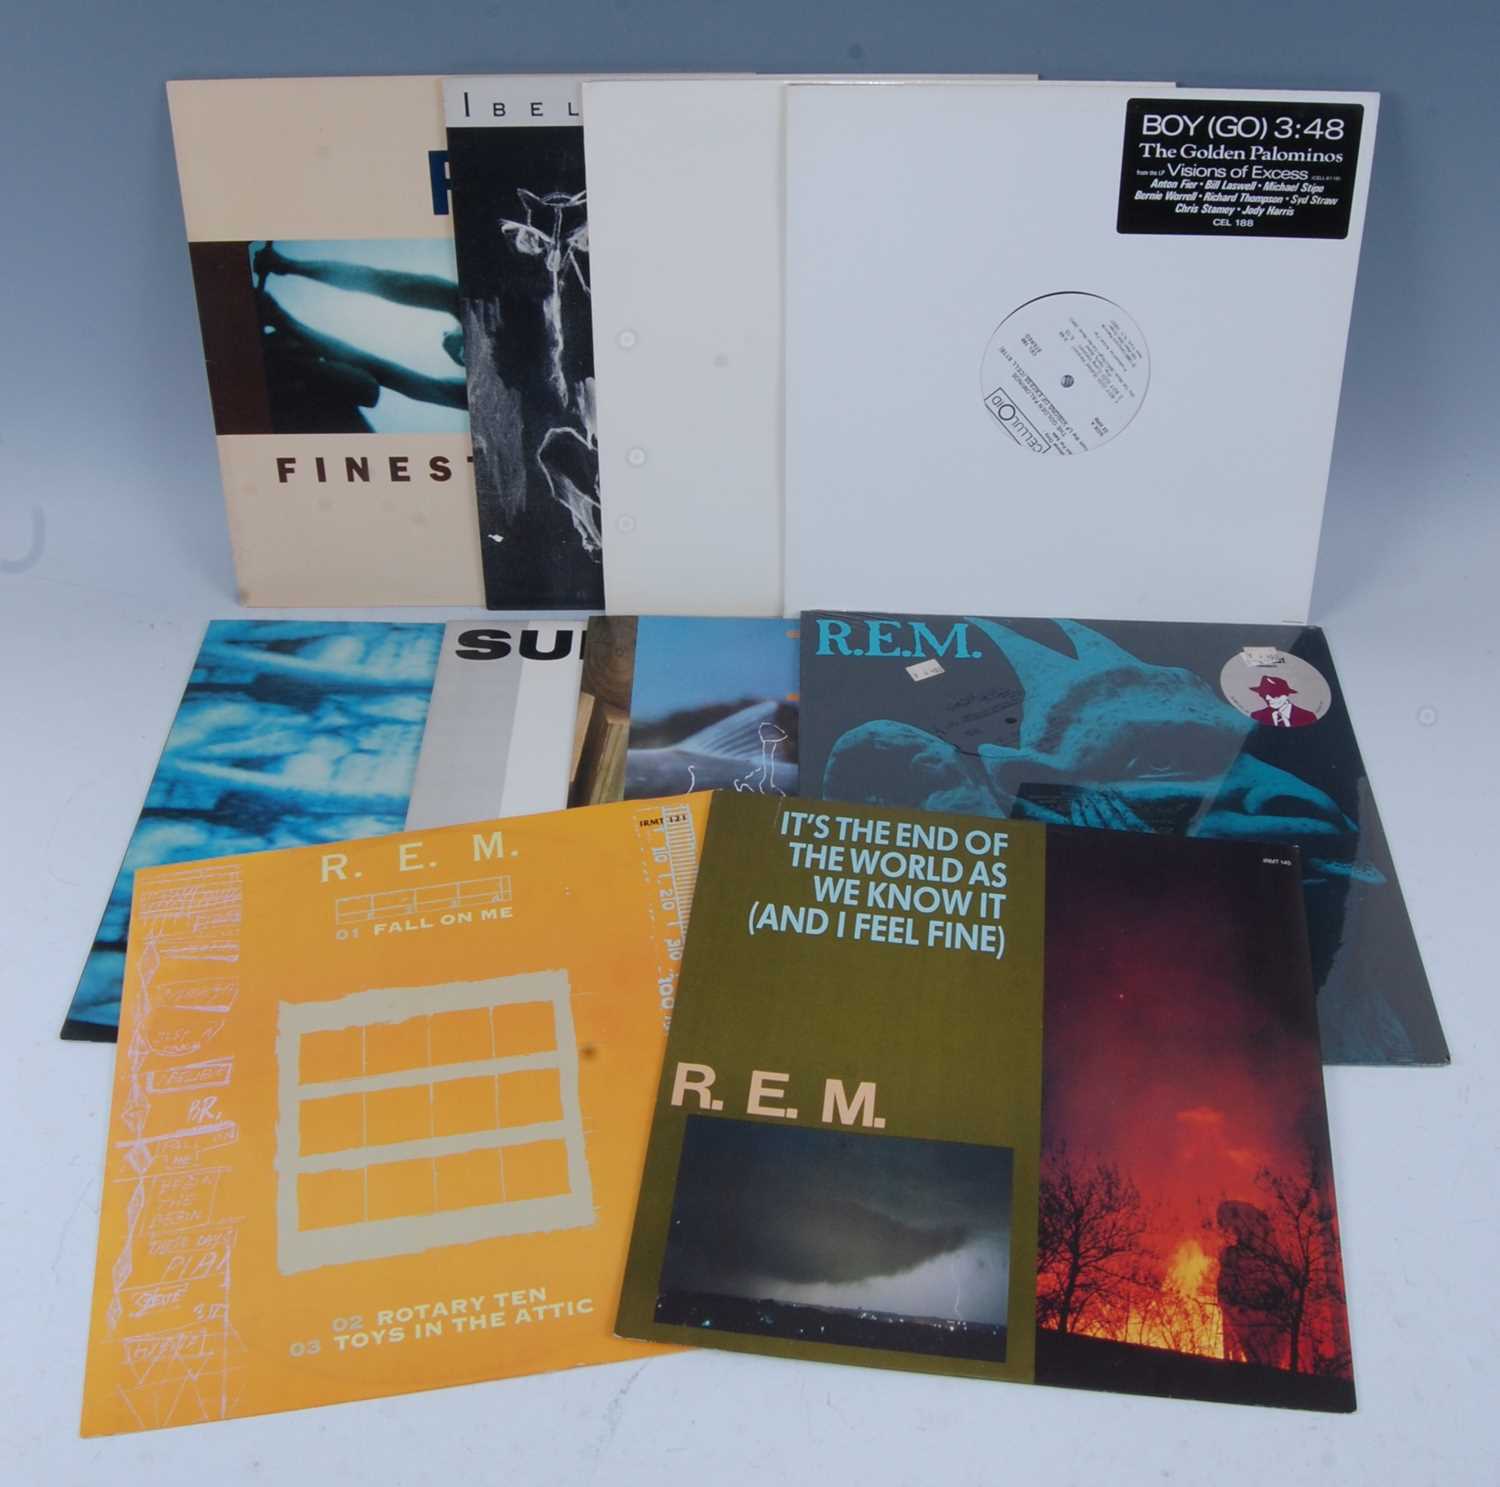 R.E.M. / The Golden Palominos, a collection of 12" vinyl to include Finest Workshop x3 (12" media - Image 2 of 2